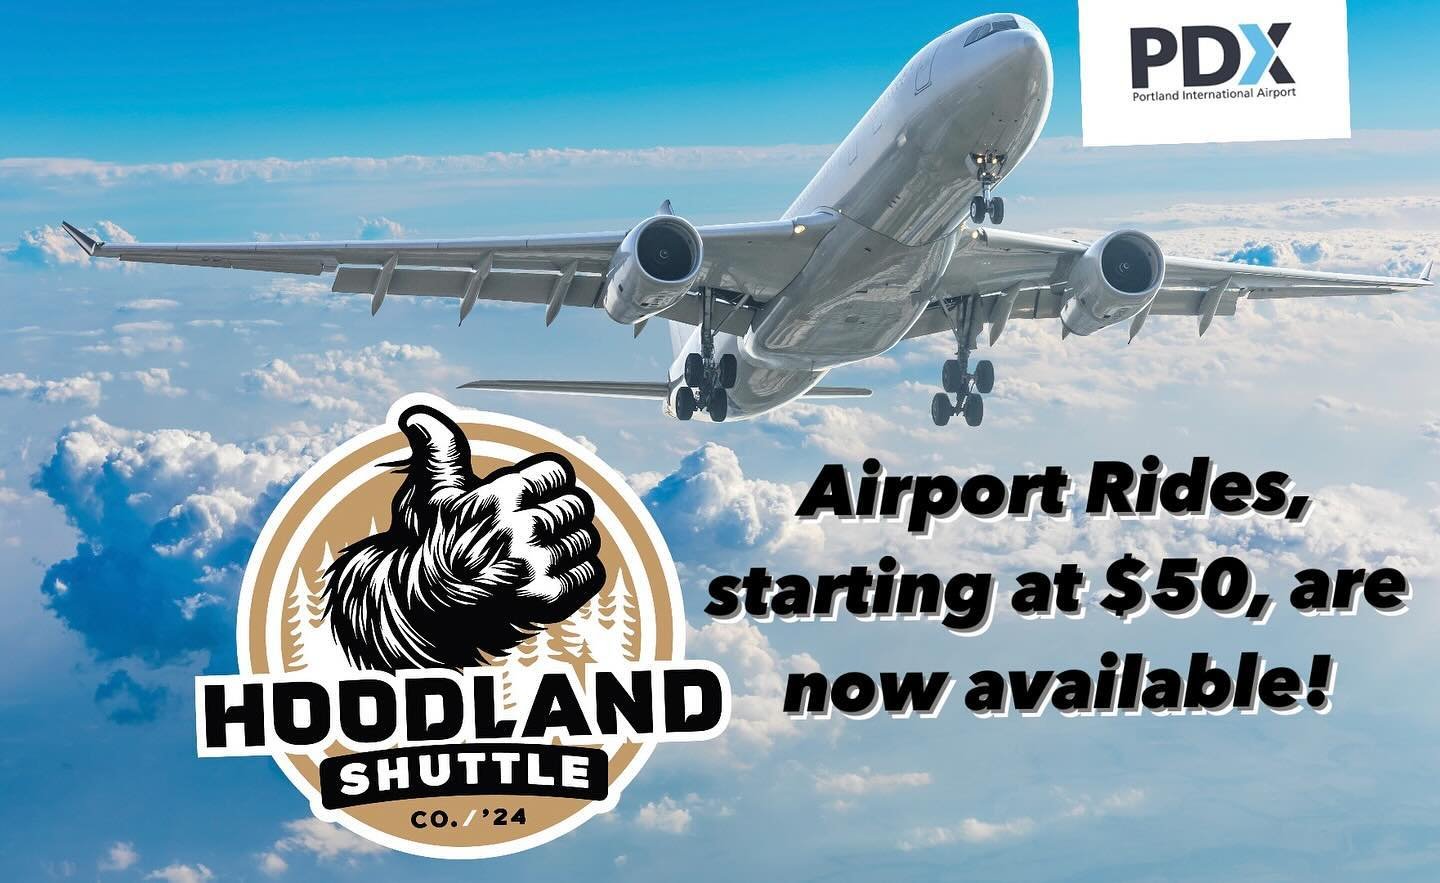 We are fully permitted to operate in Portland and PDX International! Let us take you to the airport for your next flight! Book online, call, or text! ✈️

#flypdx #airport #airportshuttle 
#connectingcommunities #hoodlandshuttle #shuttleheads #mthood 